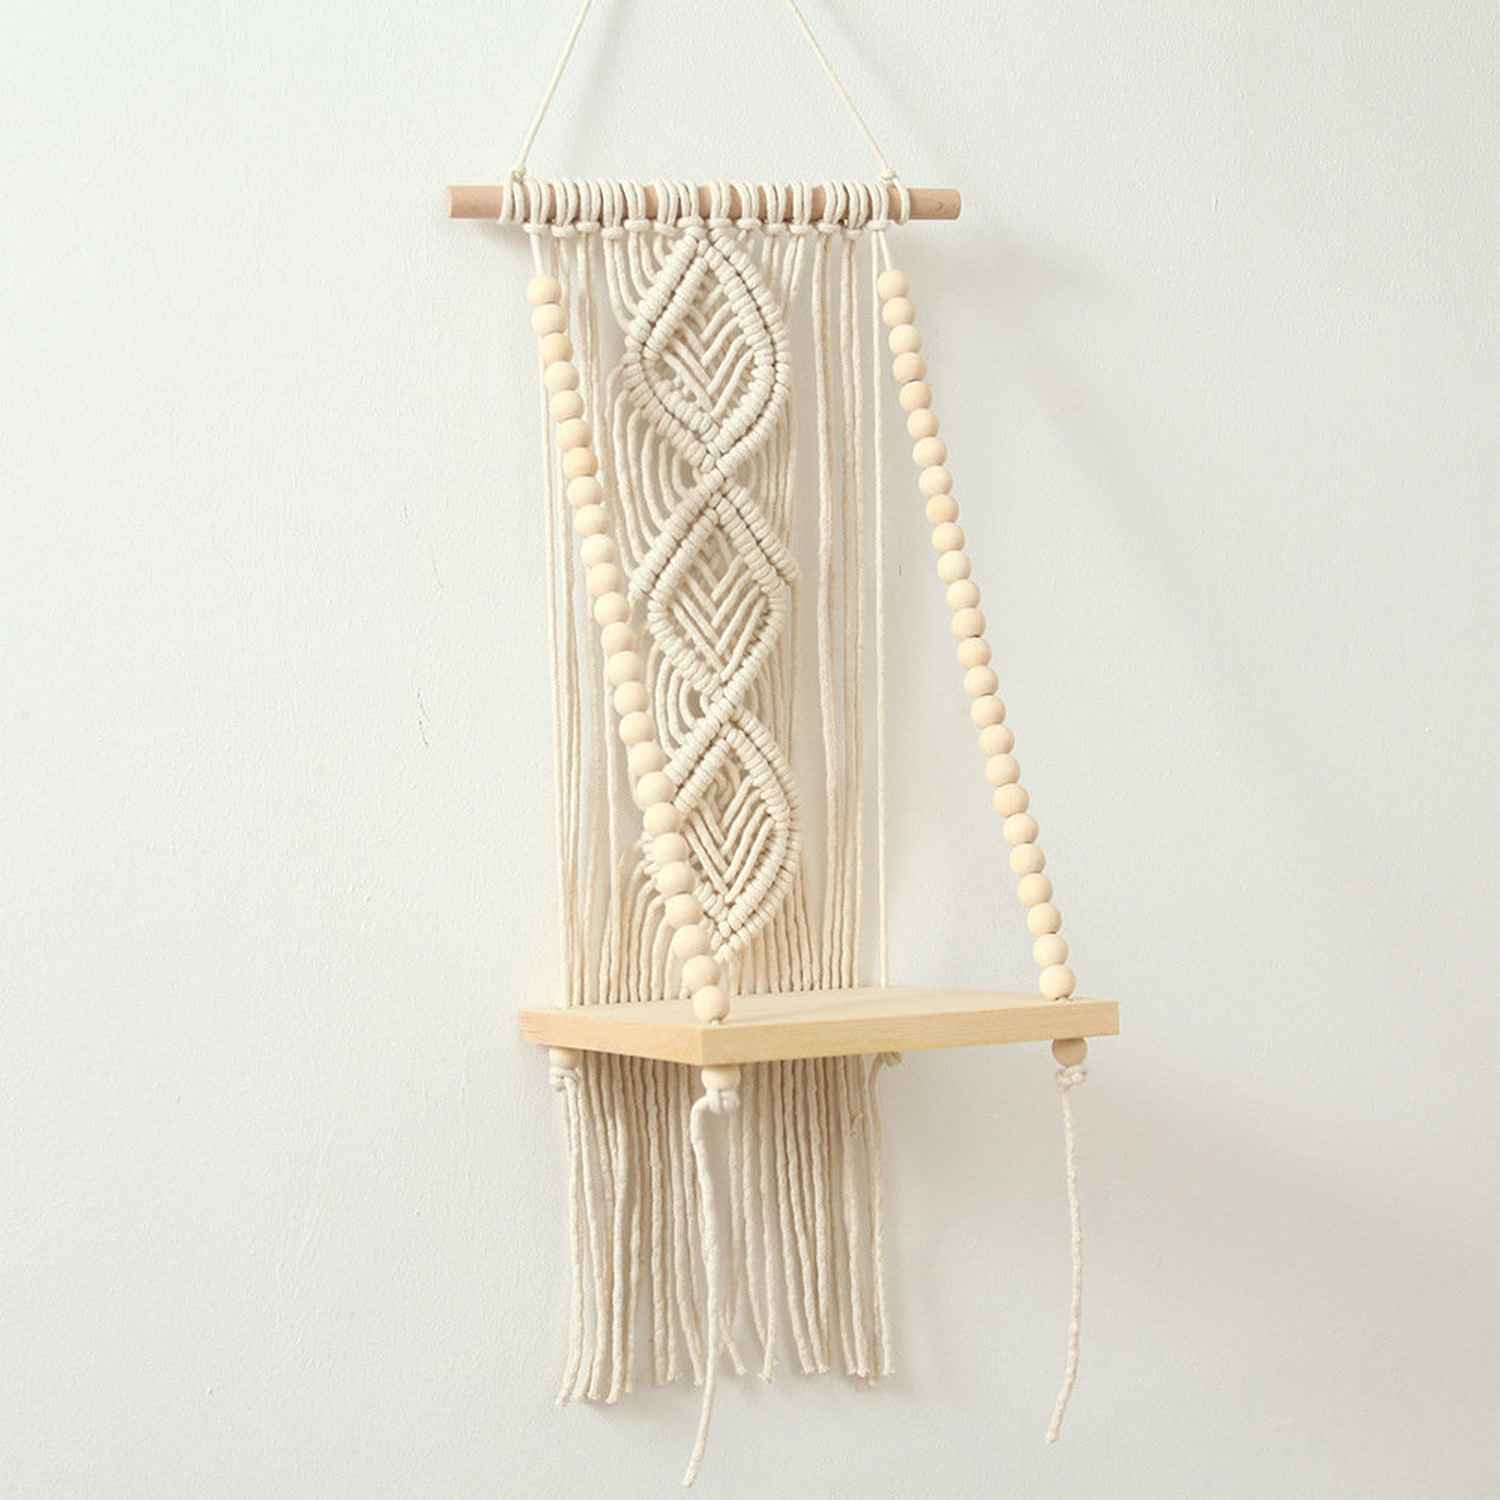 Kaahira Single Seater Stong Luxurious Handwoven Swing Chair in White Color